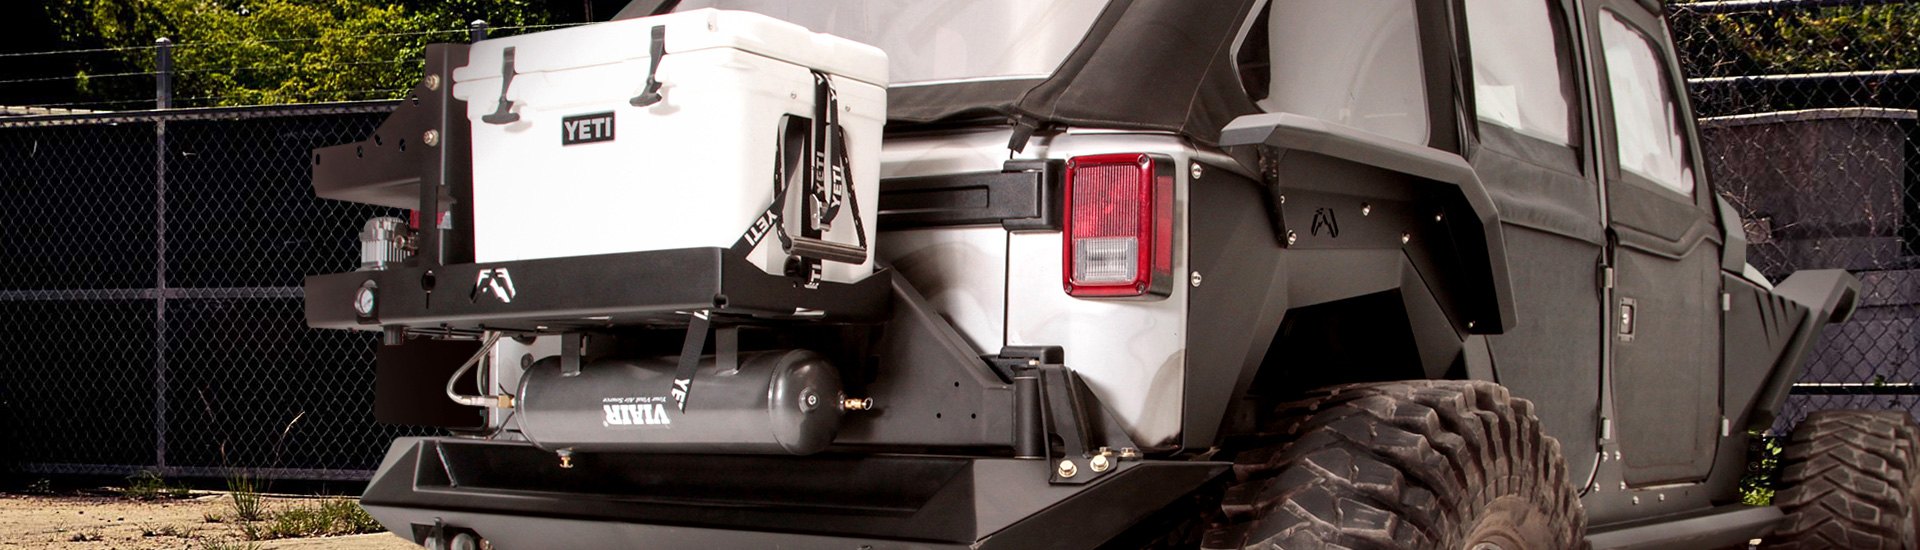 Ultimate Jeep JK Add-On: Fab Fours' Air Compressor & Yeti Cooler Mount